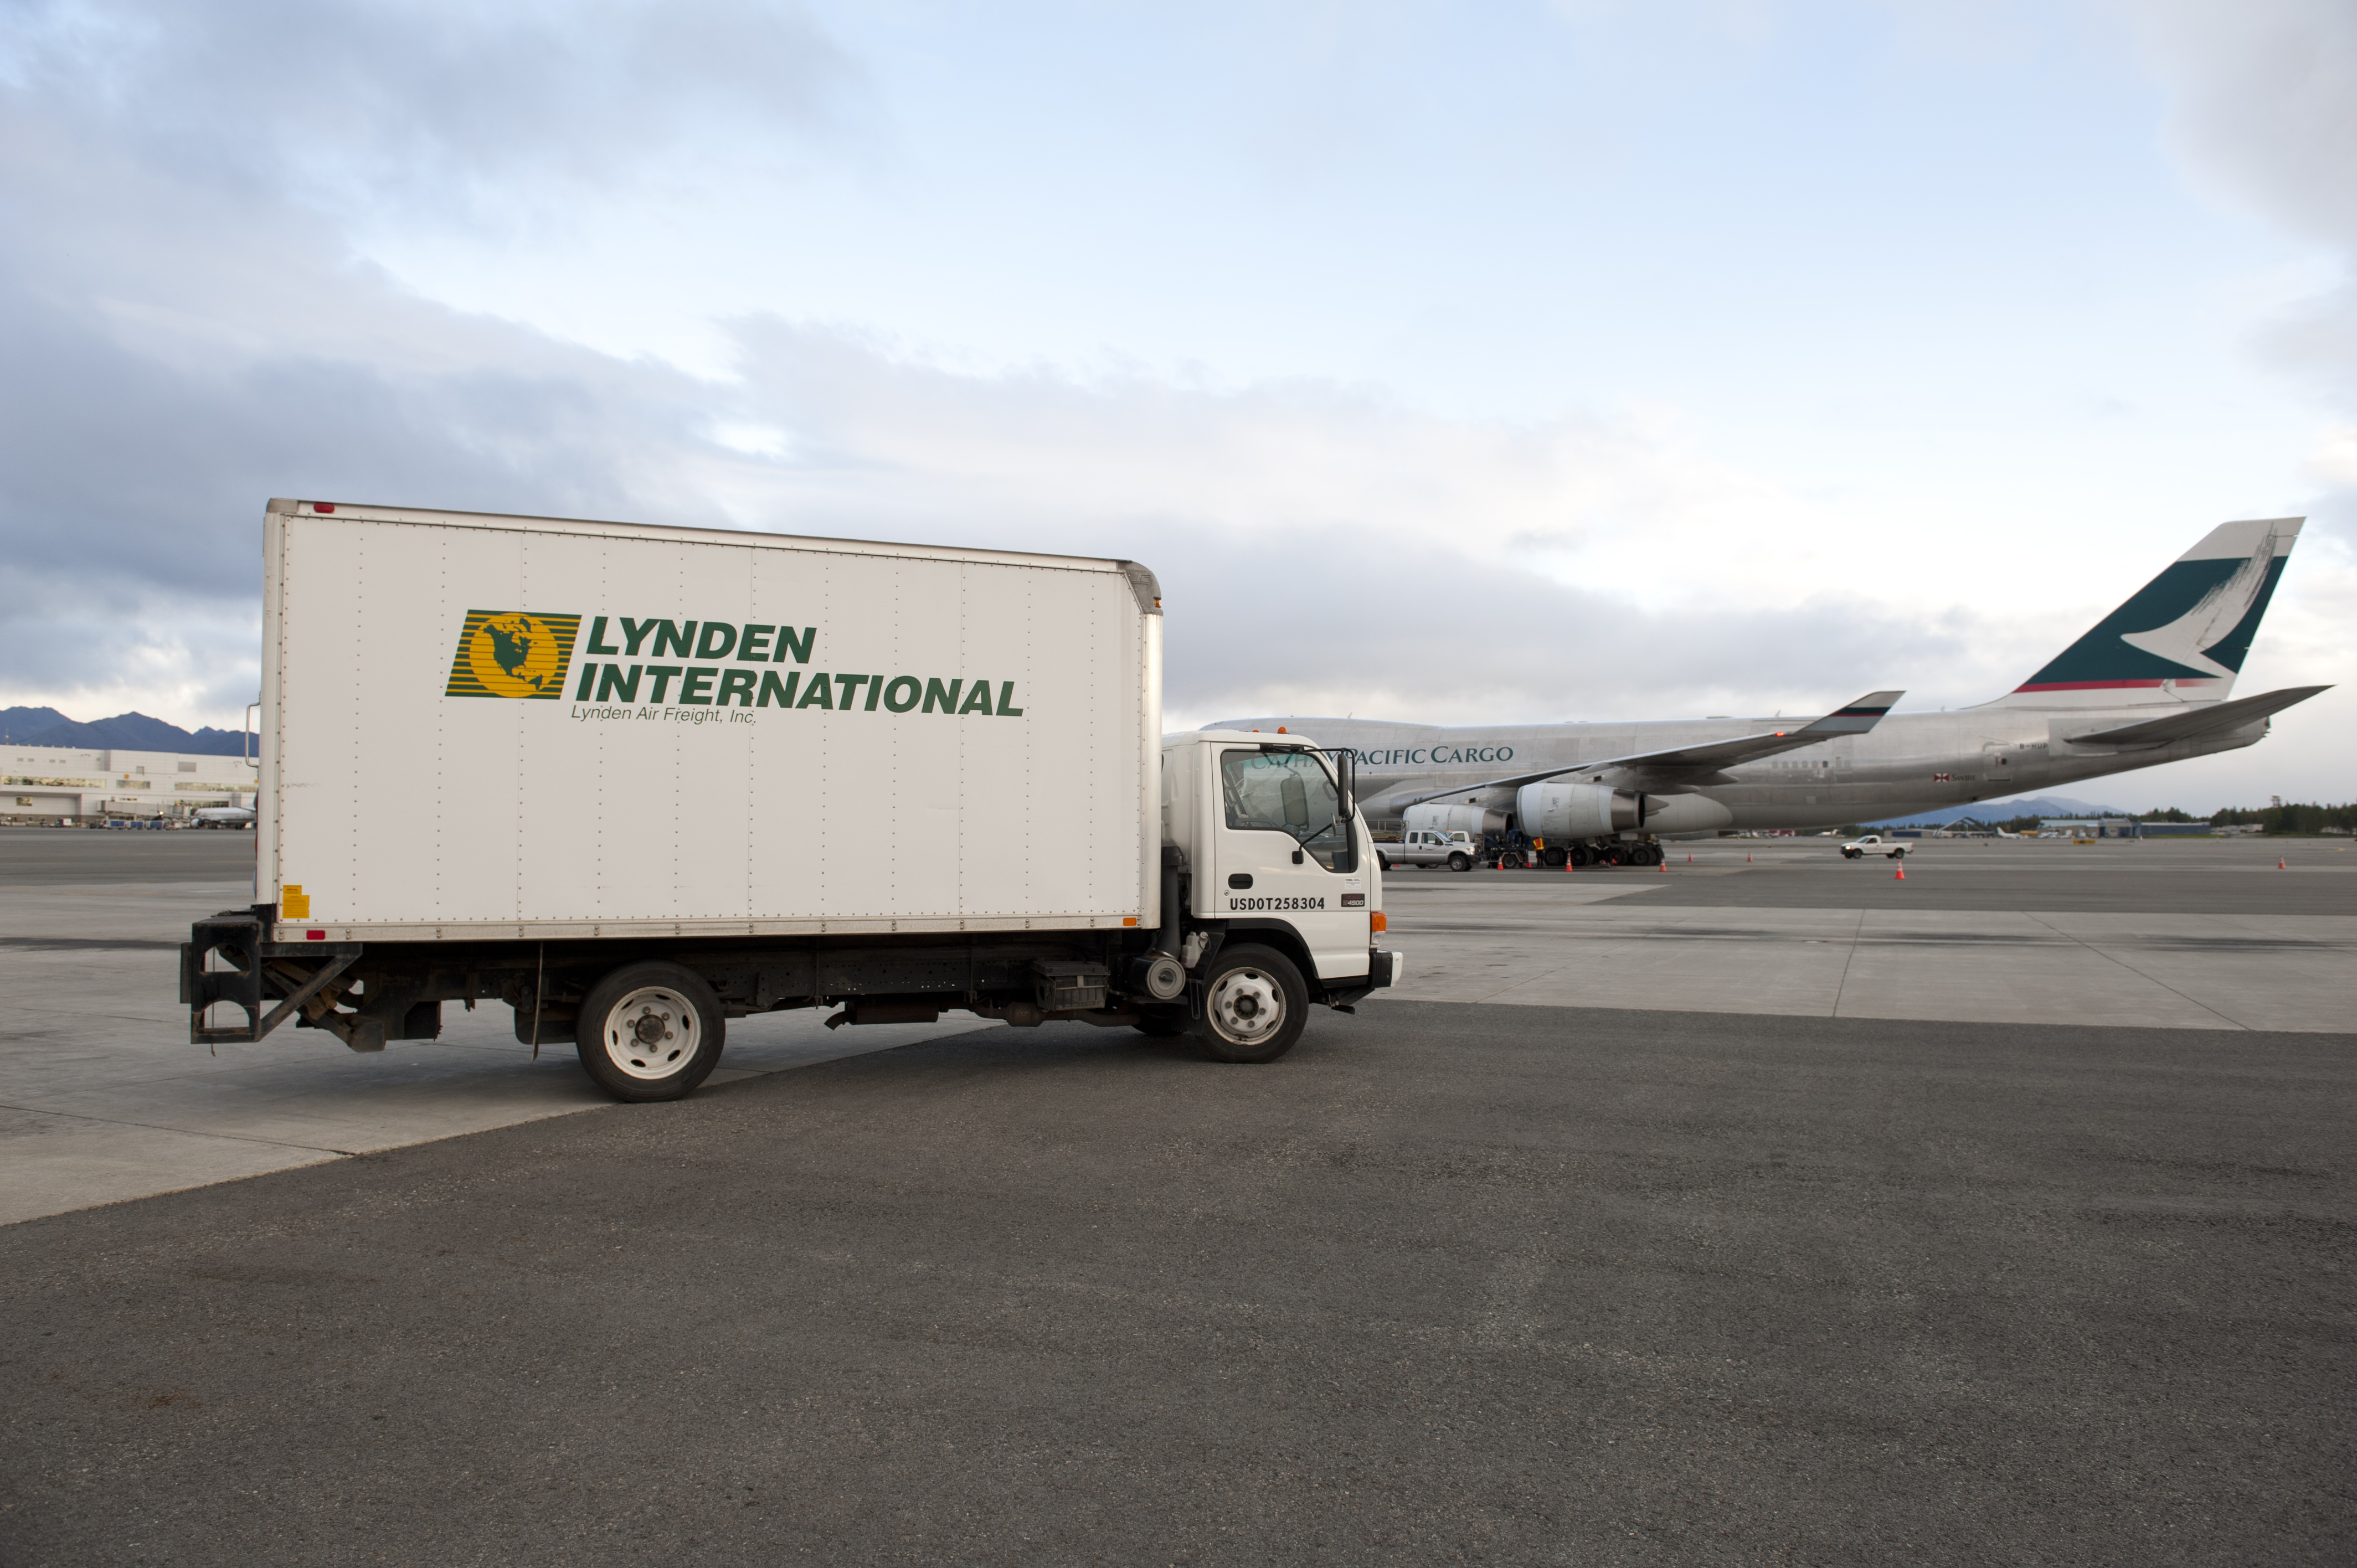 Lynden International is a logistics partner for rapid response, global projects and health and humanitarian programs in many challenging, underdeveloped corners of the world